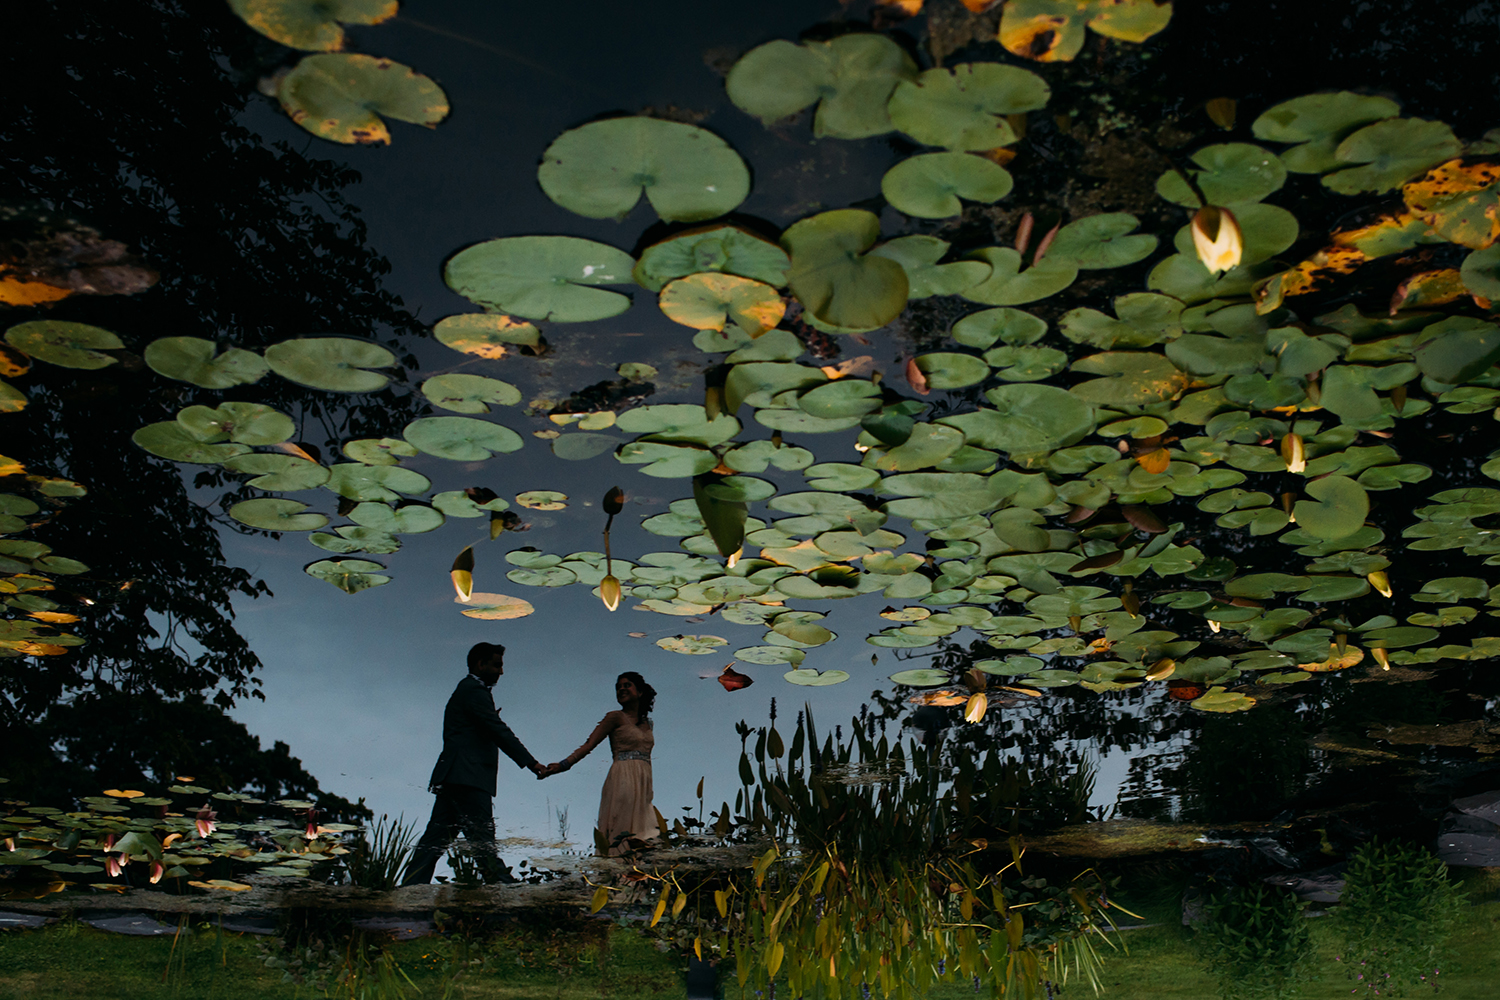  reflection of bride and groom in a pond 